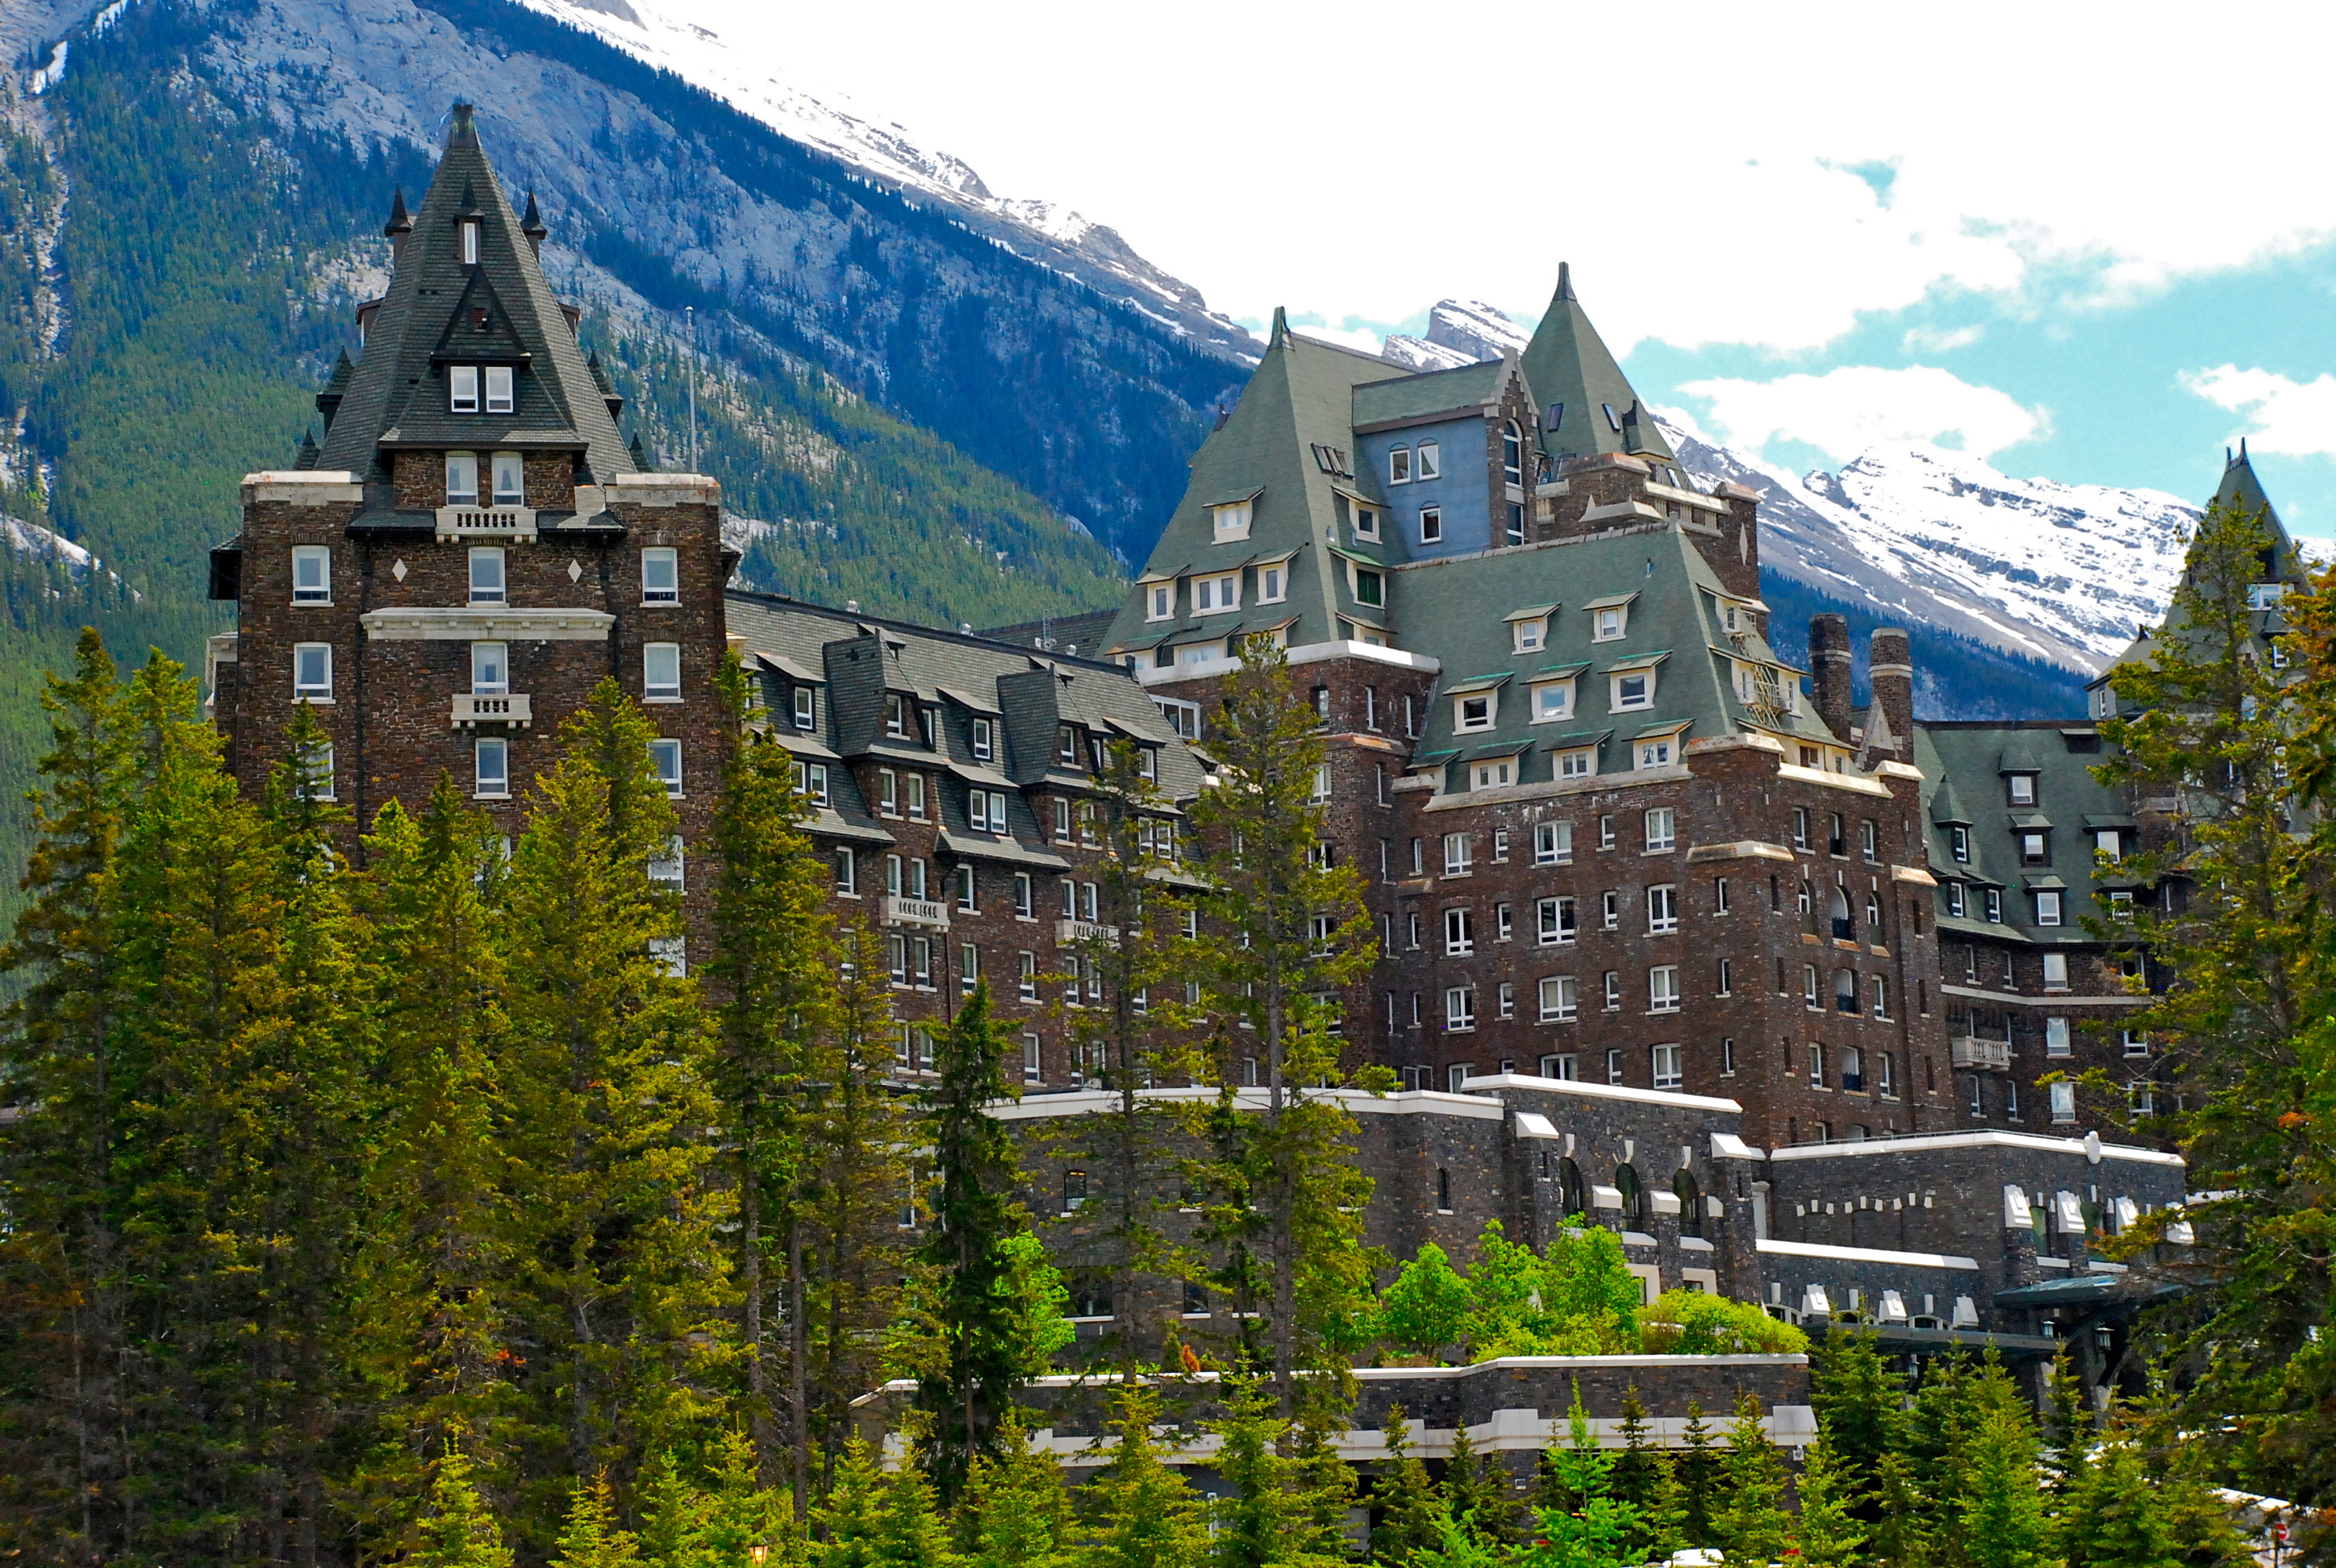 Luxuriating at the Fairmont Banff Springs Hotel - Canadian Rockies ...